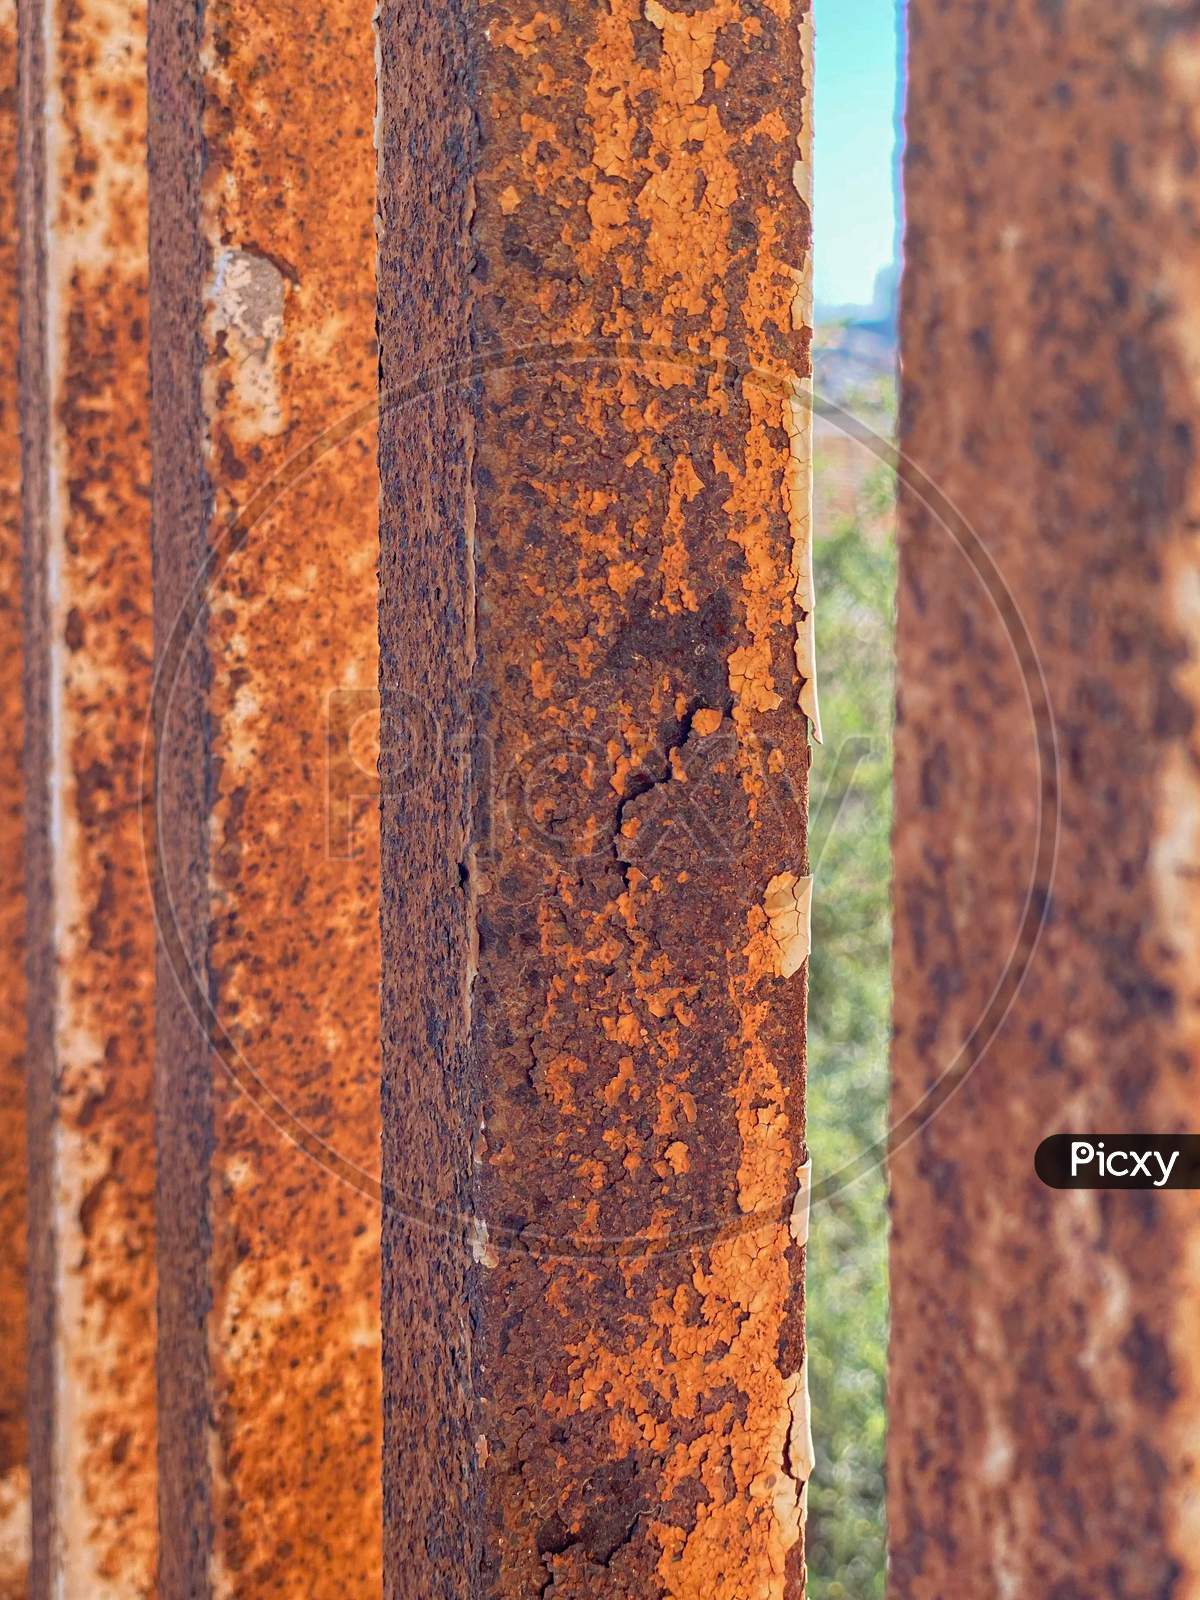 Rusted Old Iron Grills On A Fence